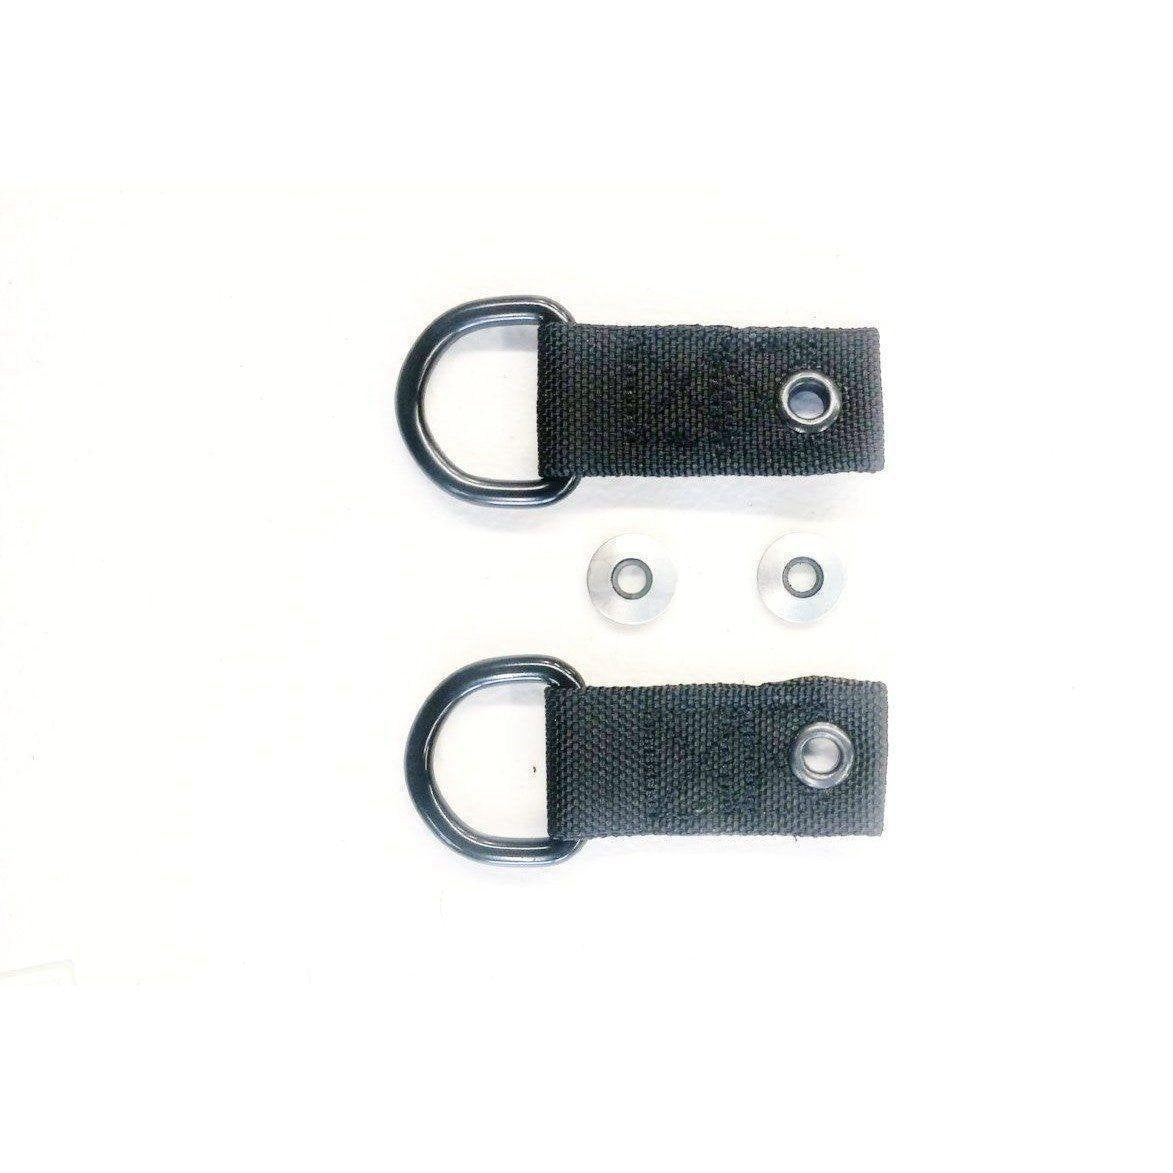 C100G D-Ring with Strap and Rubber Grommets Hardware Kit